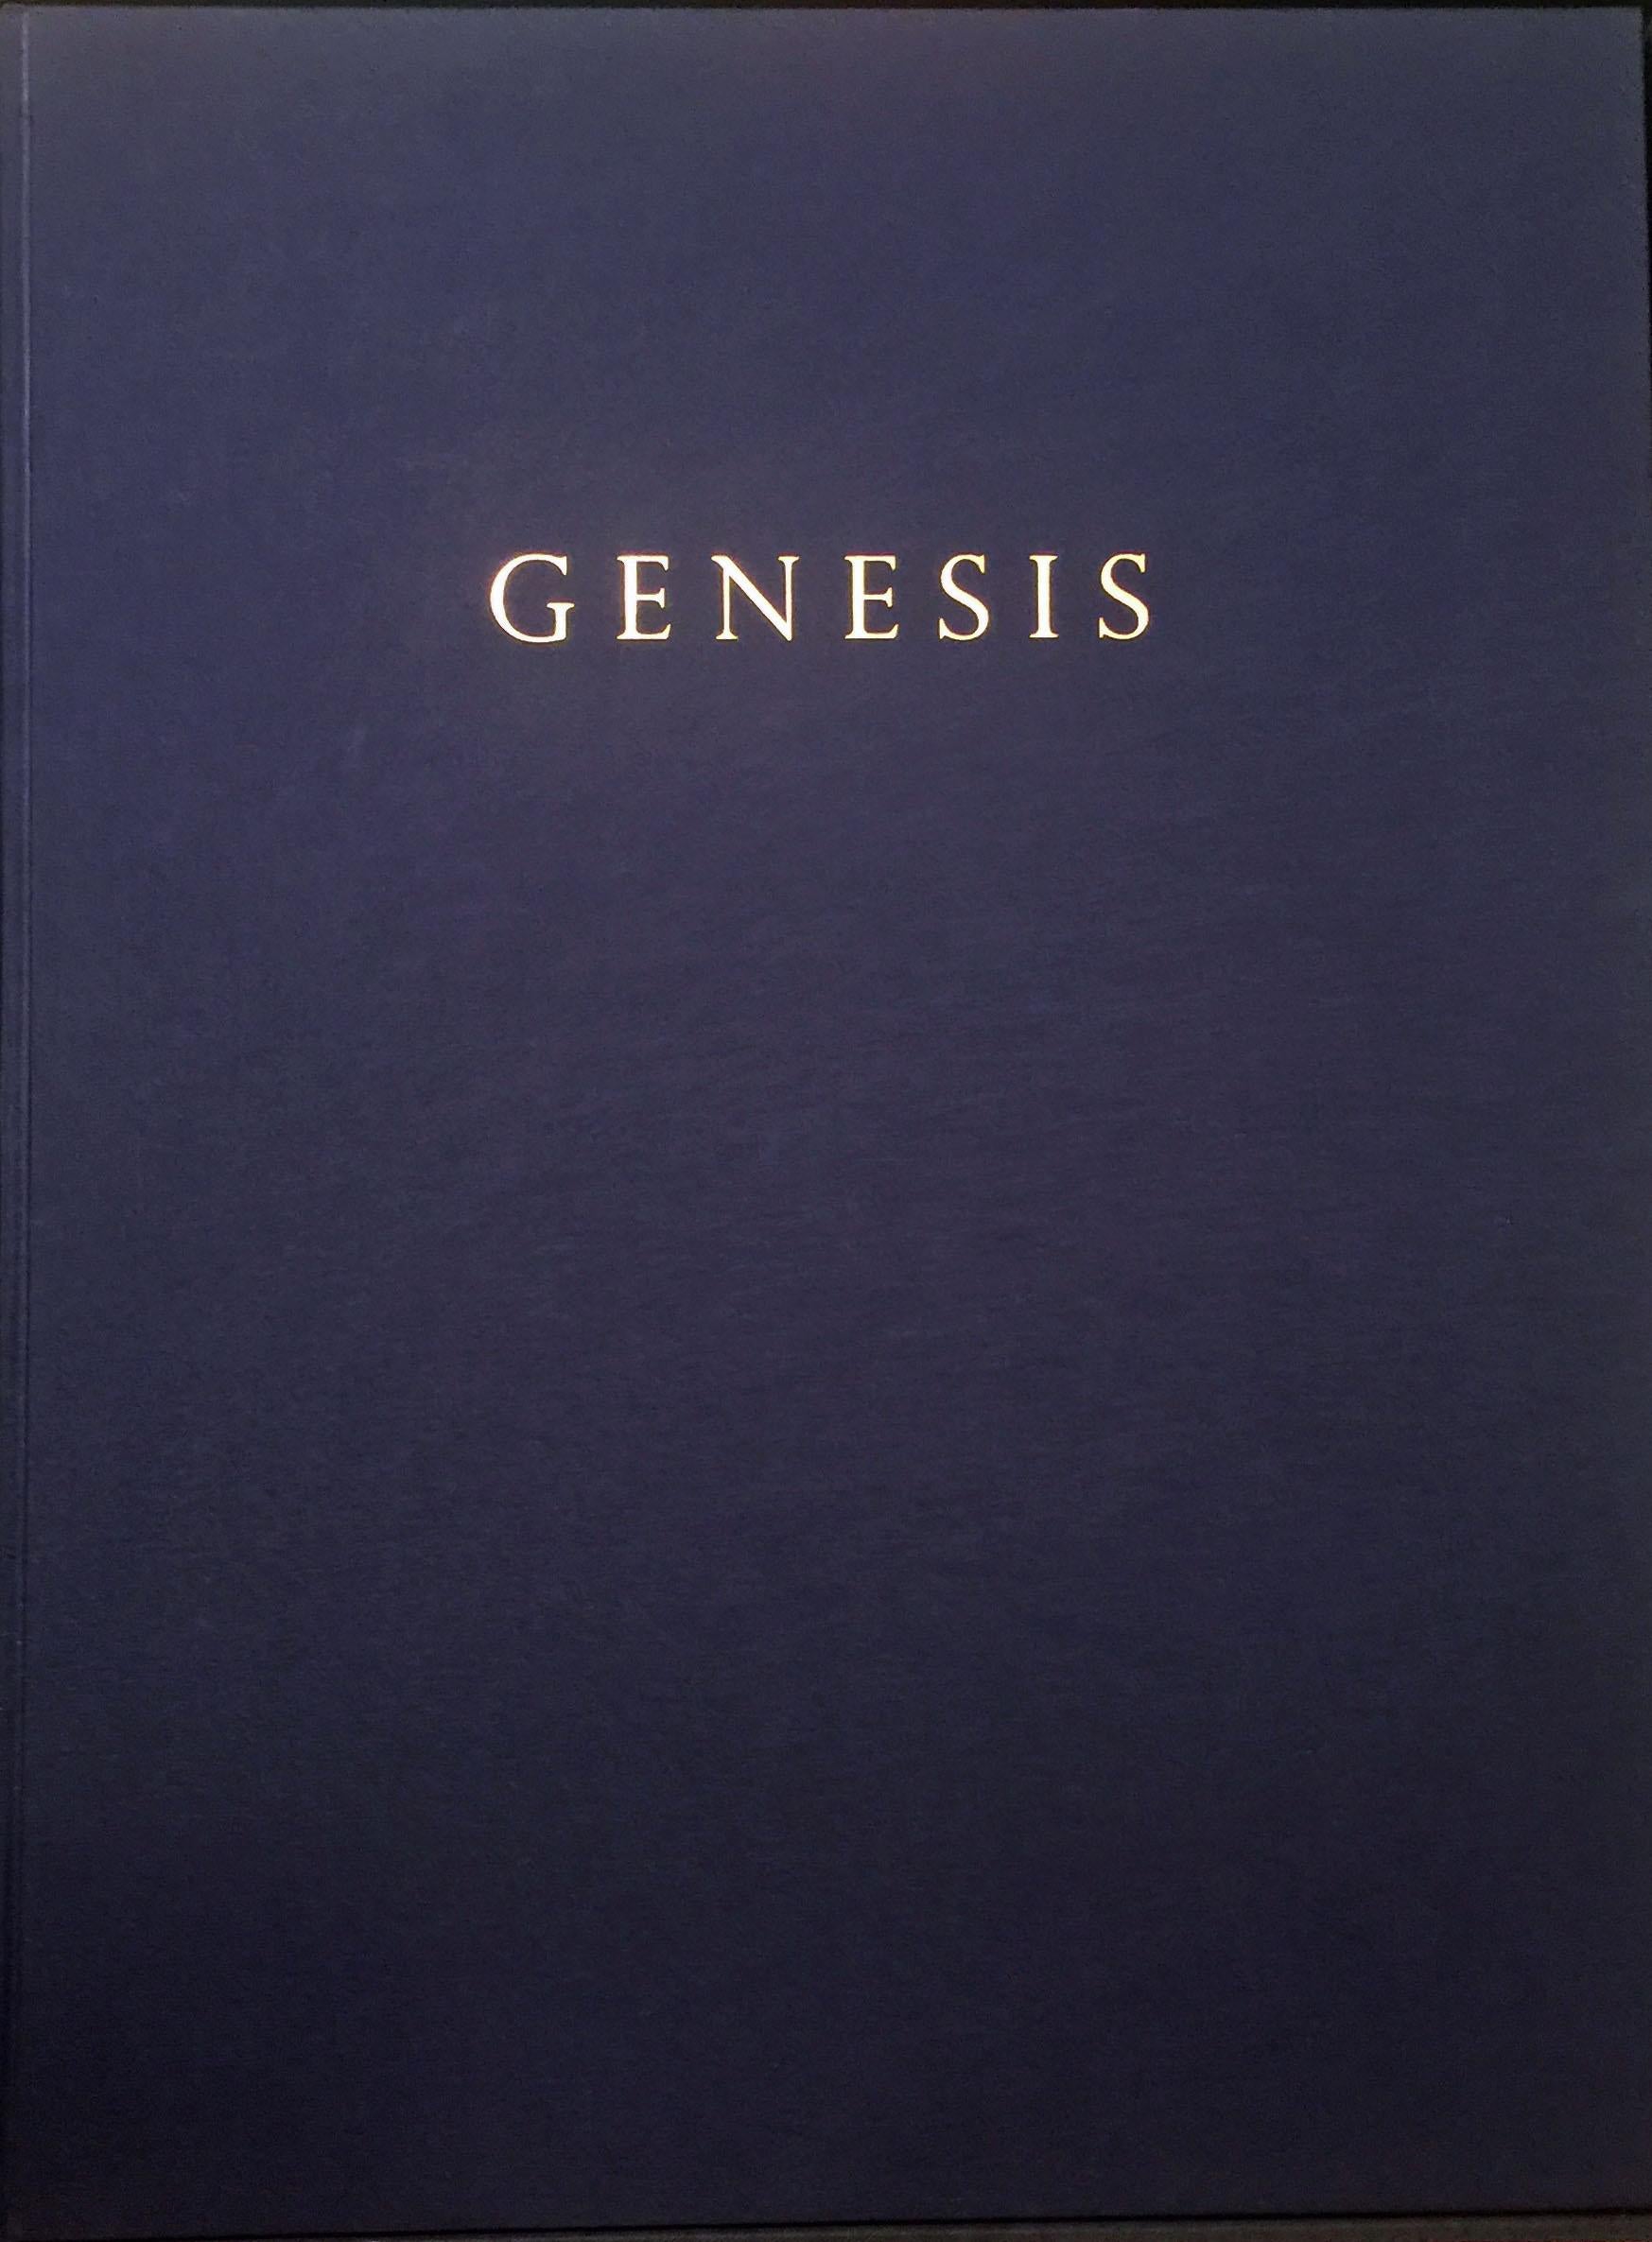 THE FIRST BOOK OF MOSES, CALLED GENESIS.  4